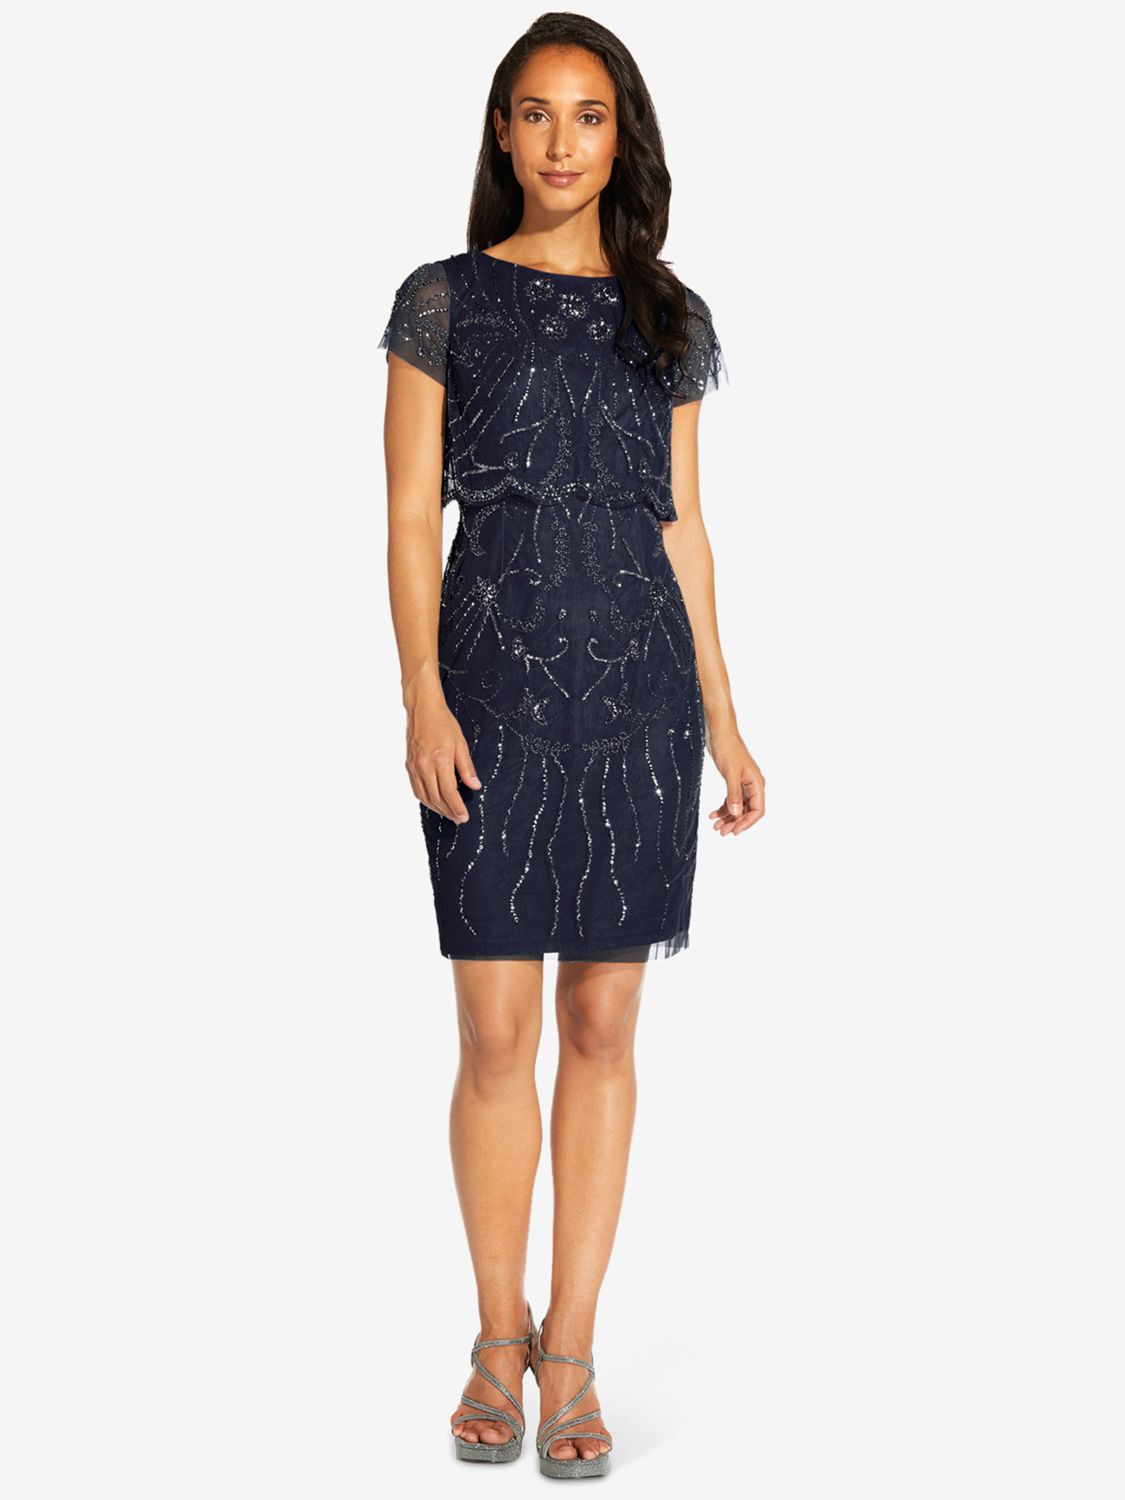 Adrianna Papell Beaded Cocktail Dress, Midnight at John Lewis